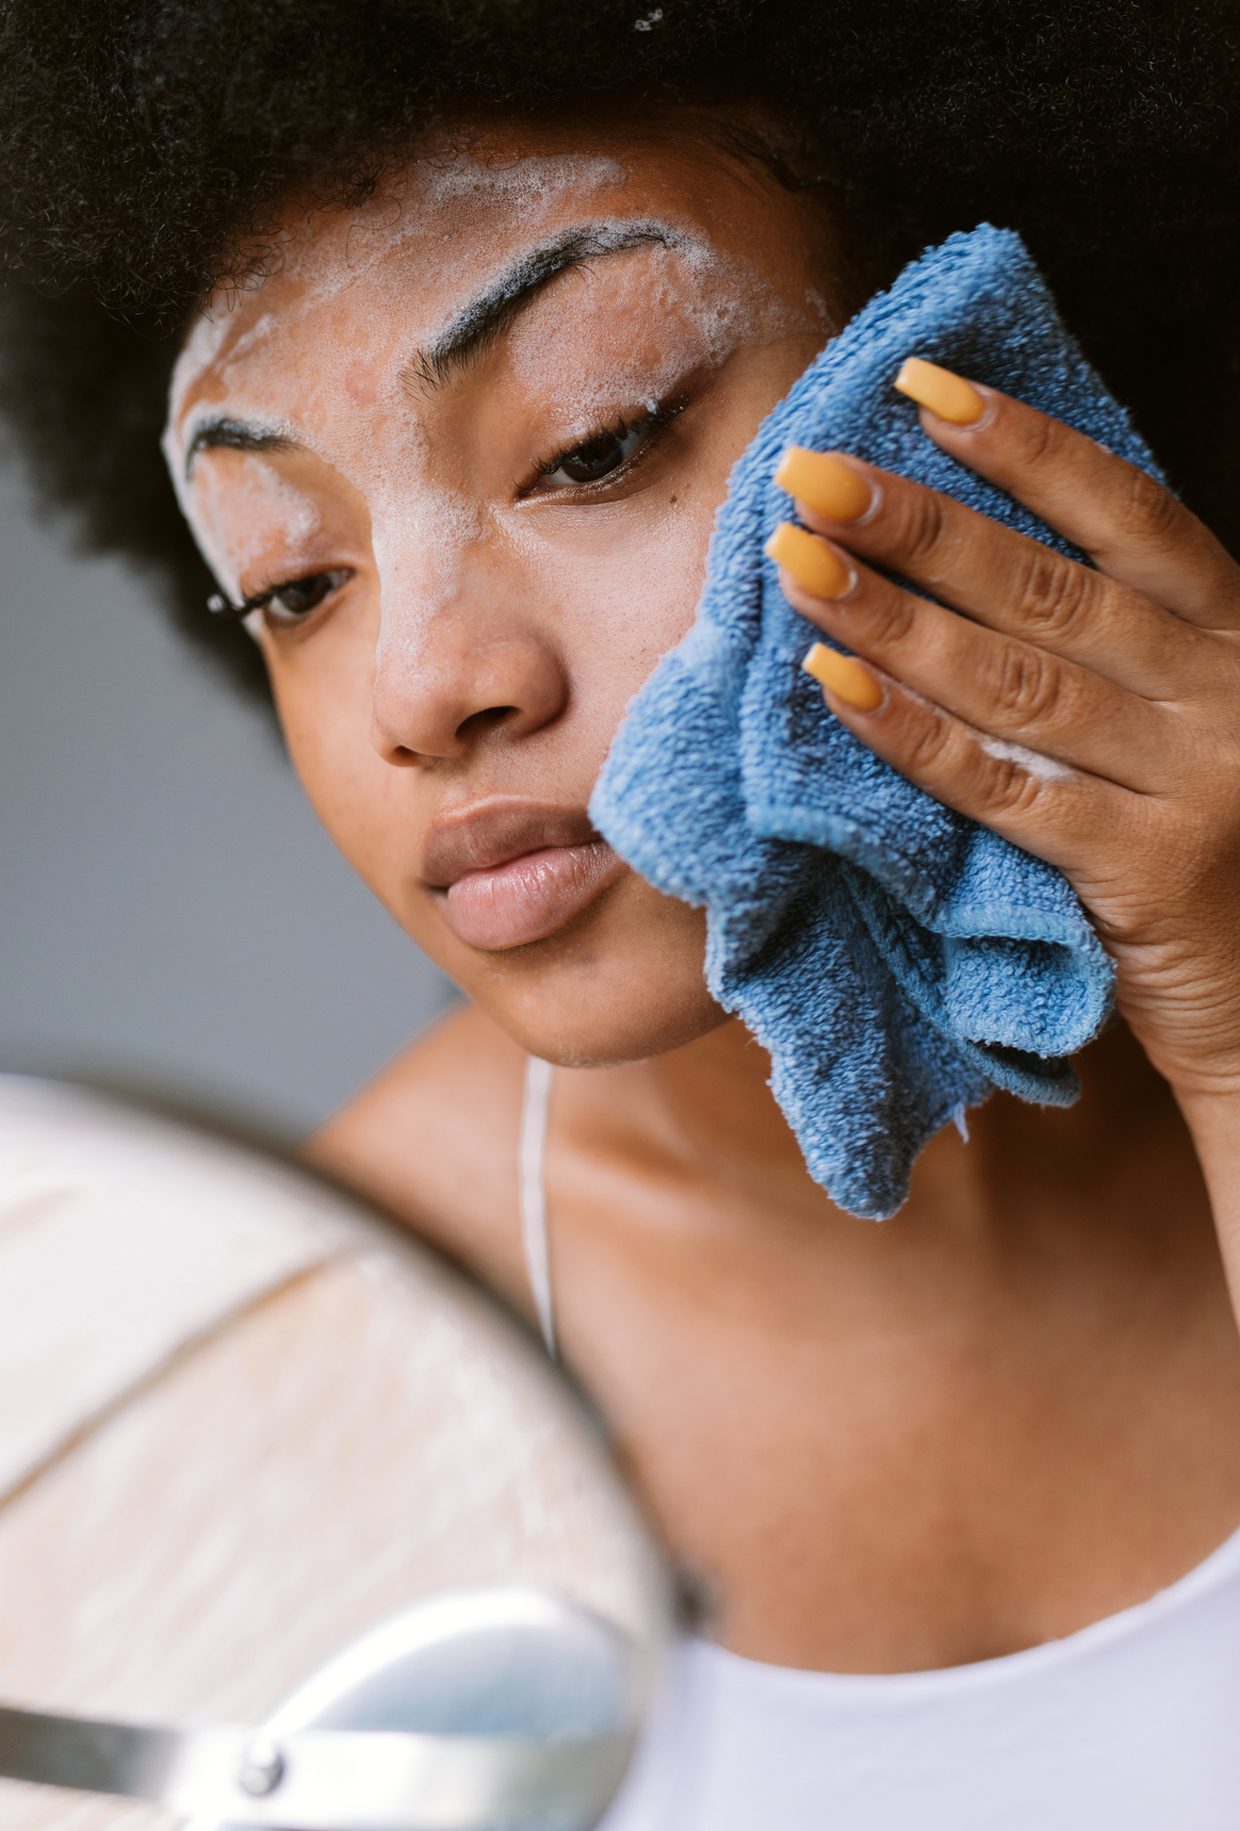 woman washing face with washcloth